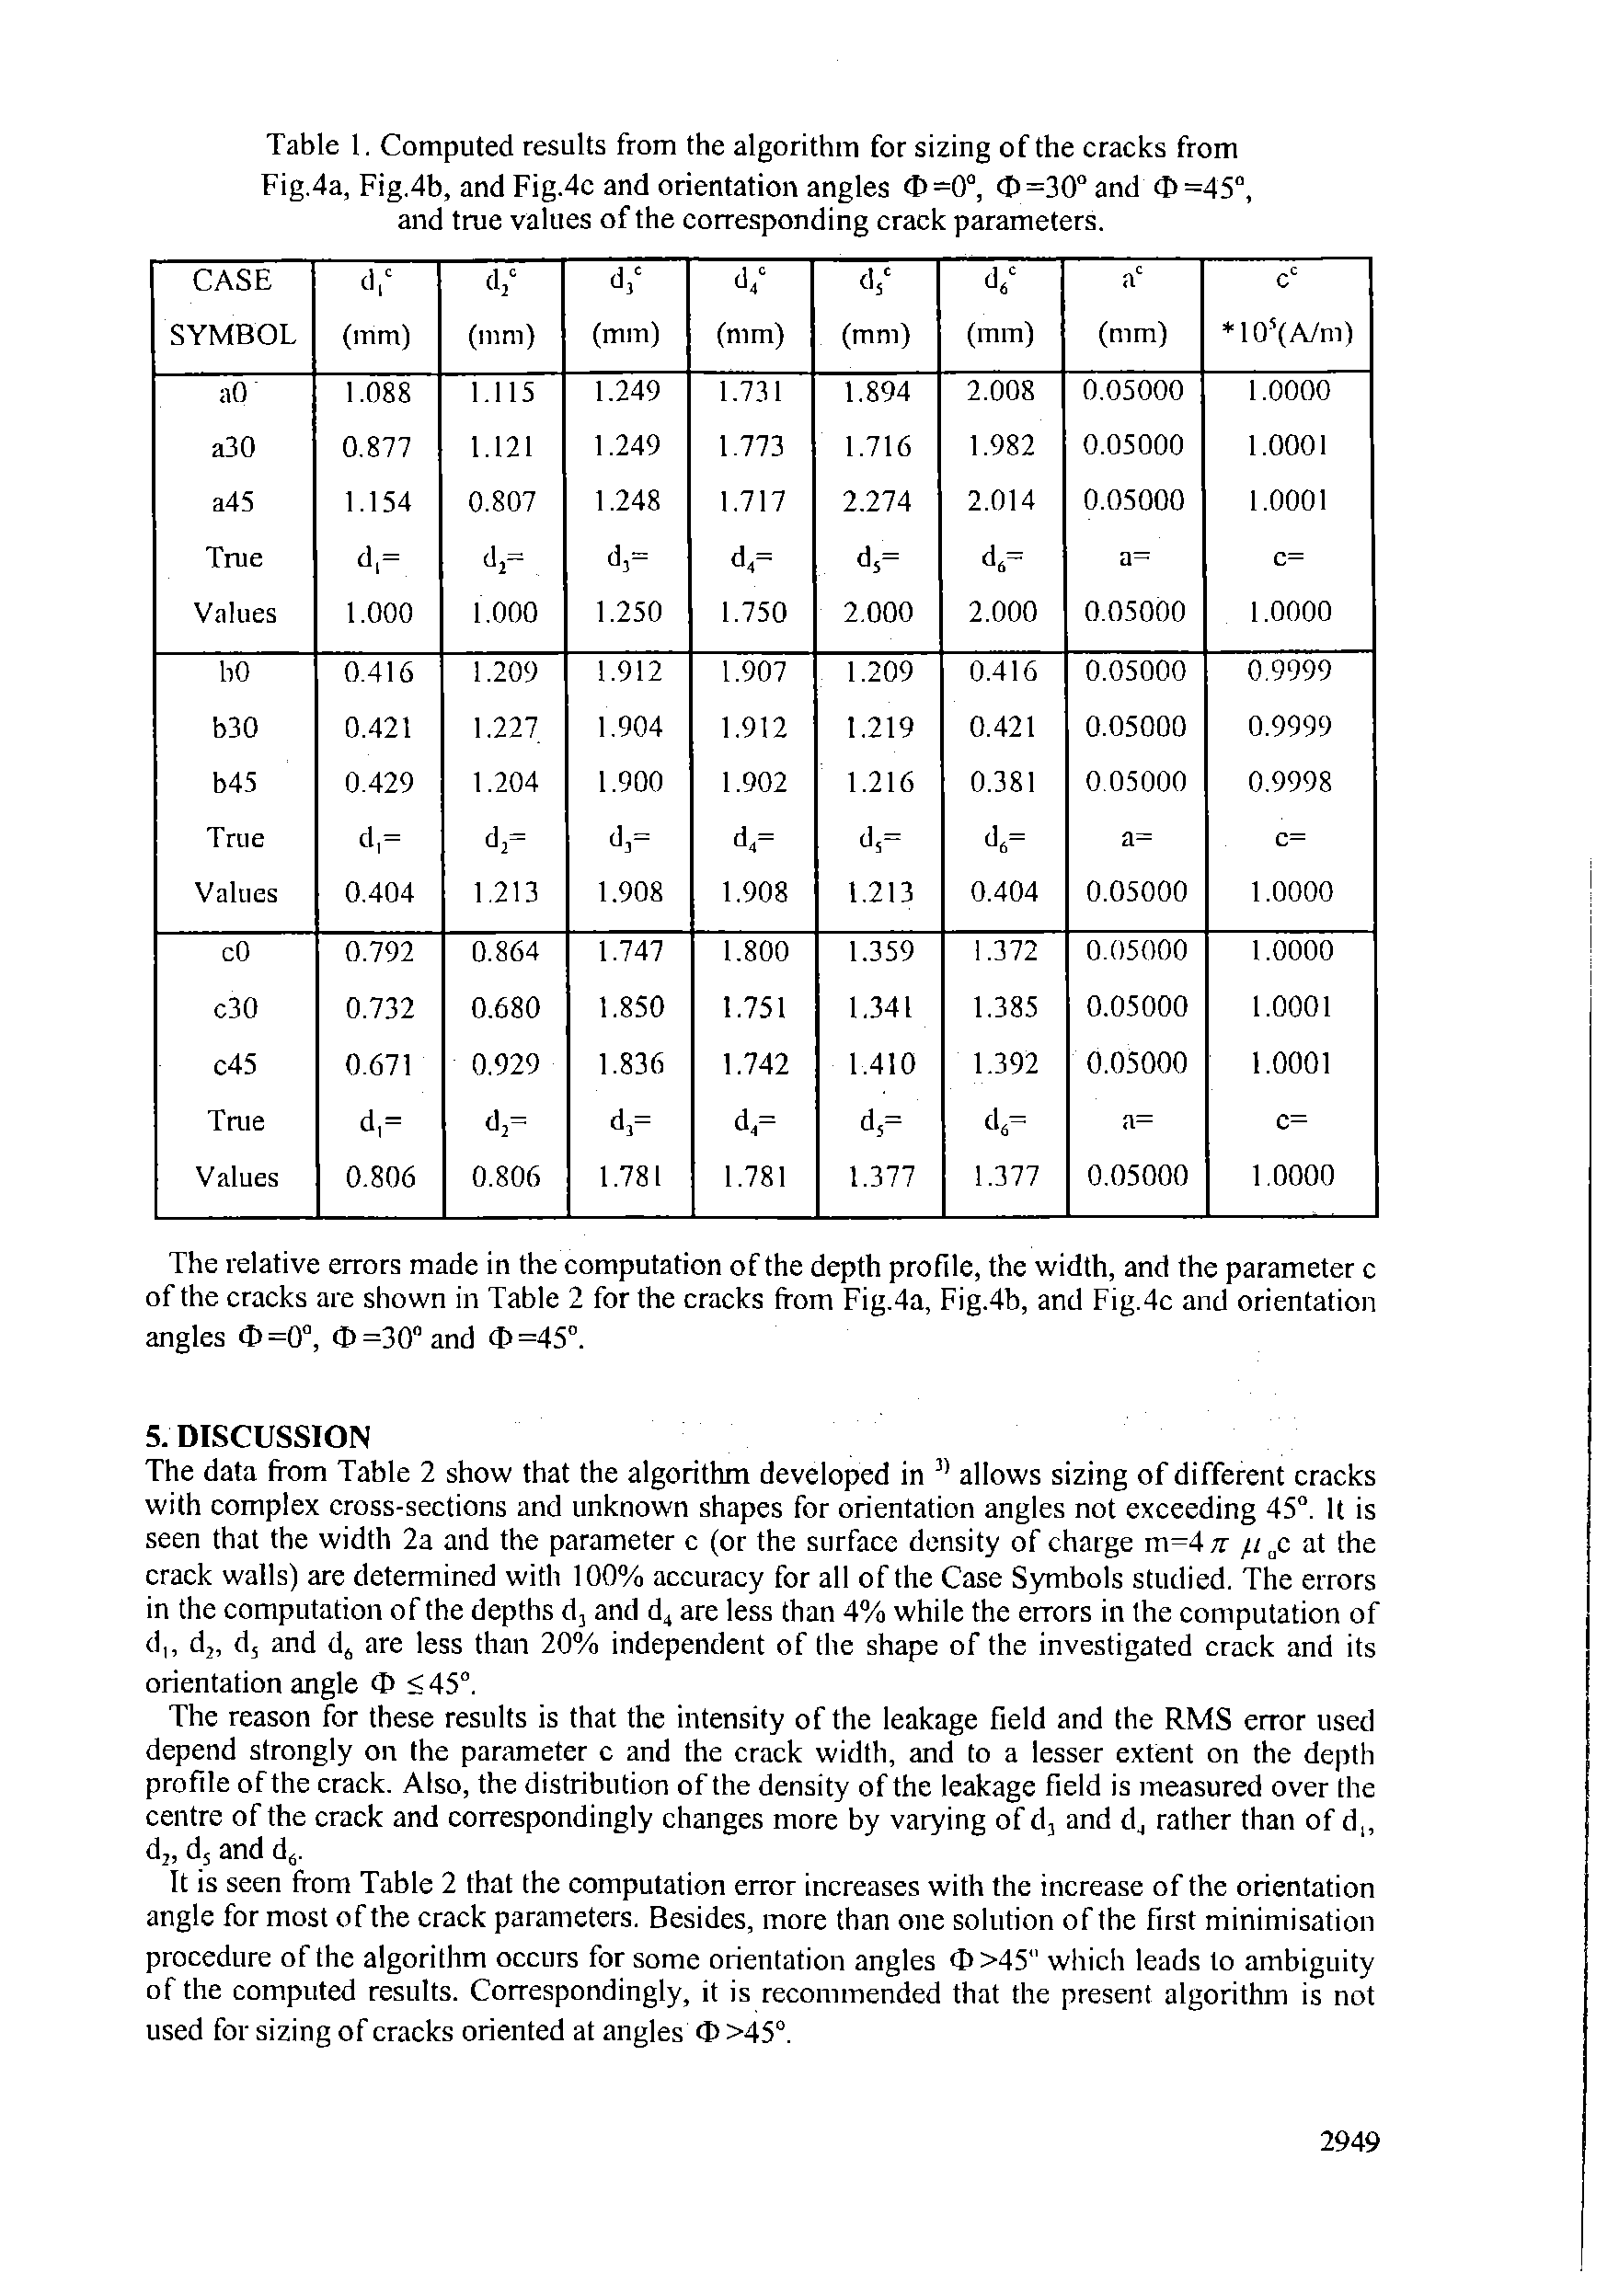 Table 1. Computed results from the algorithm for sizing of the cracks from Fig.4a, Fig.4b, and Fig.4c and orientation angles d)=0°, 0=30° and 0=45°, and true values of the eorresponding crack parameters.